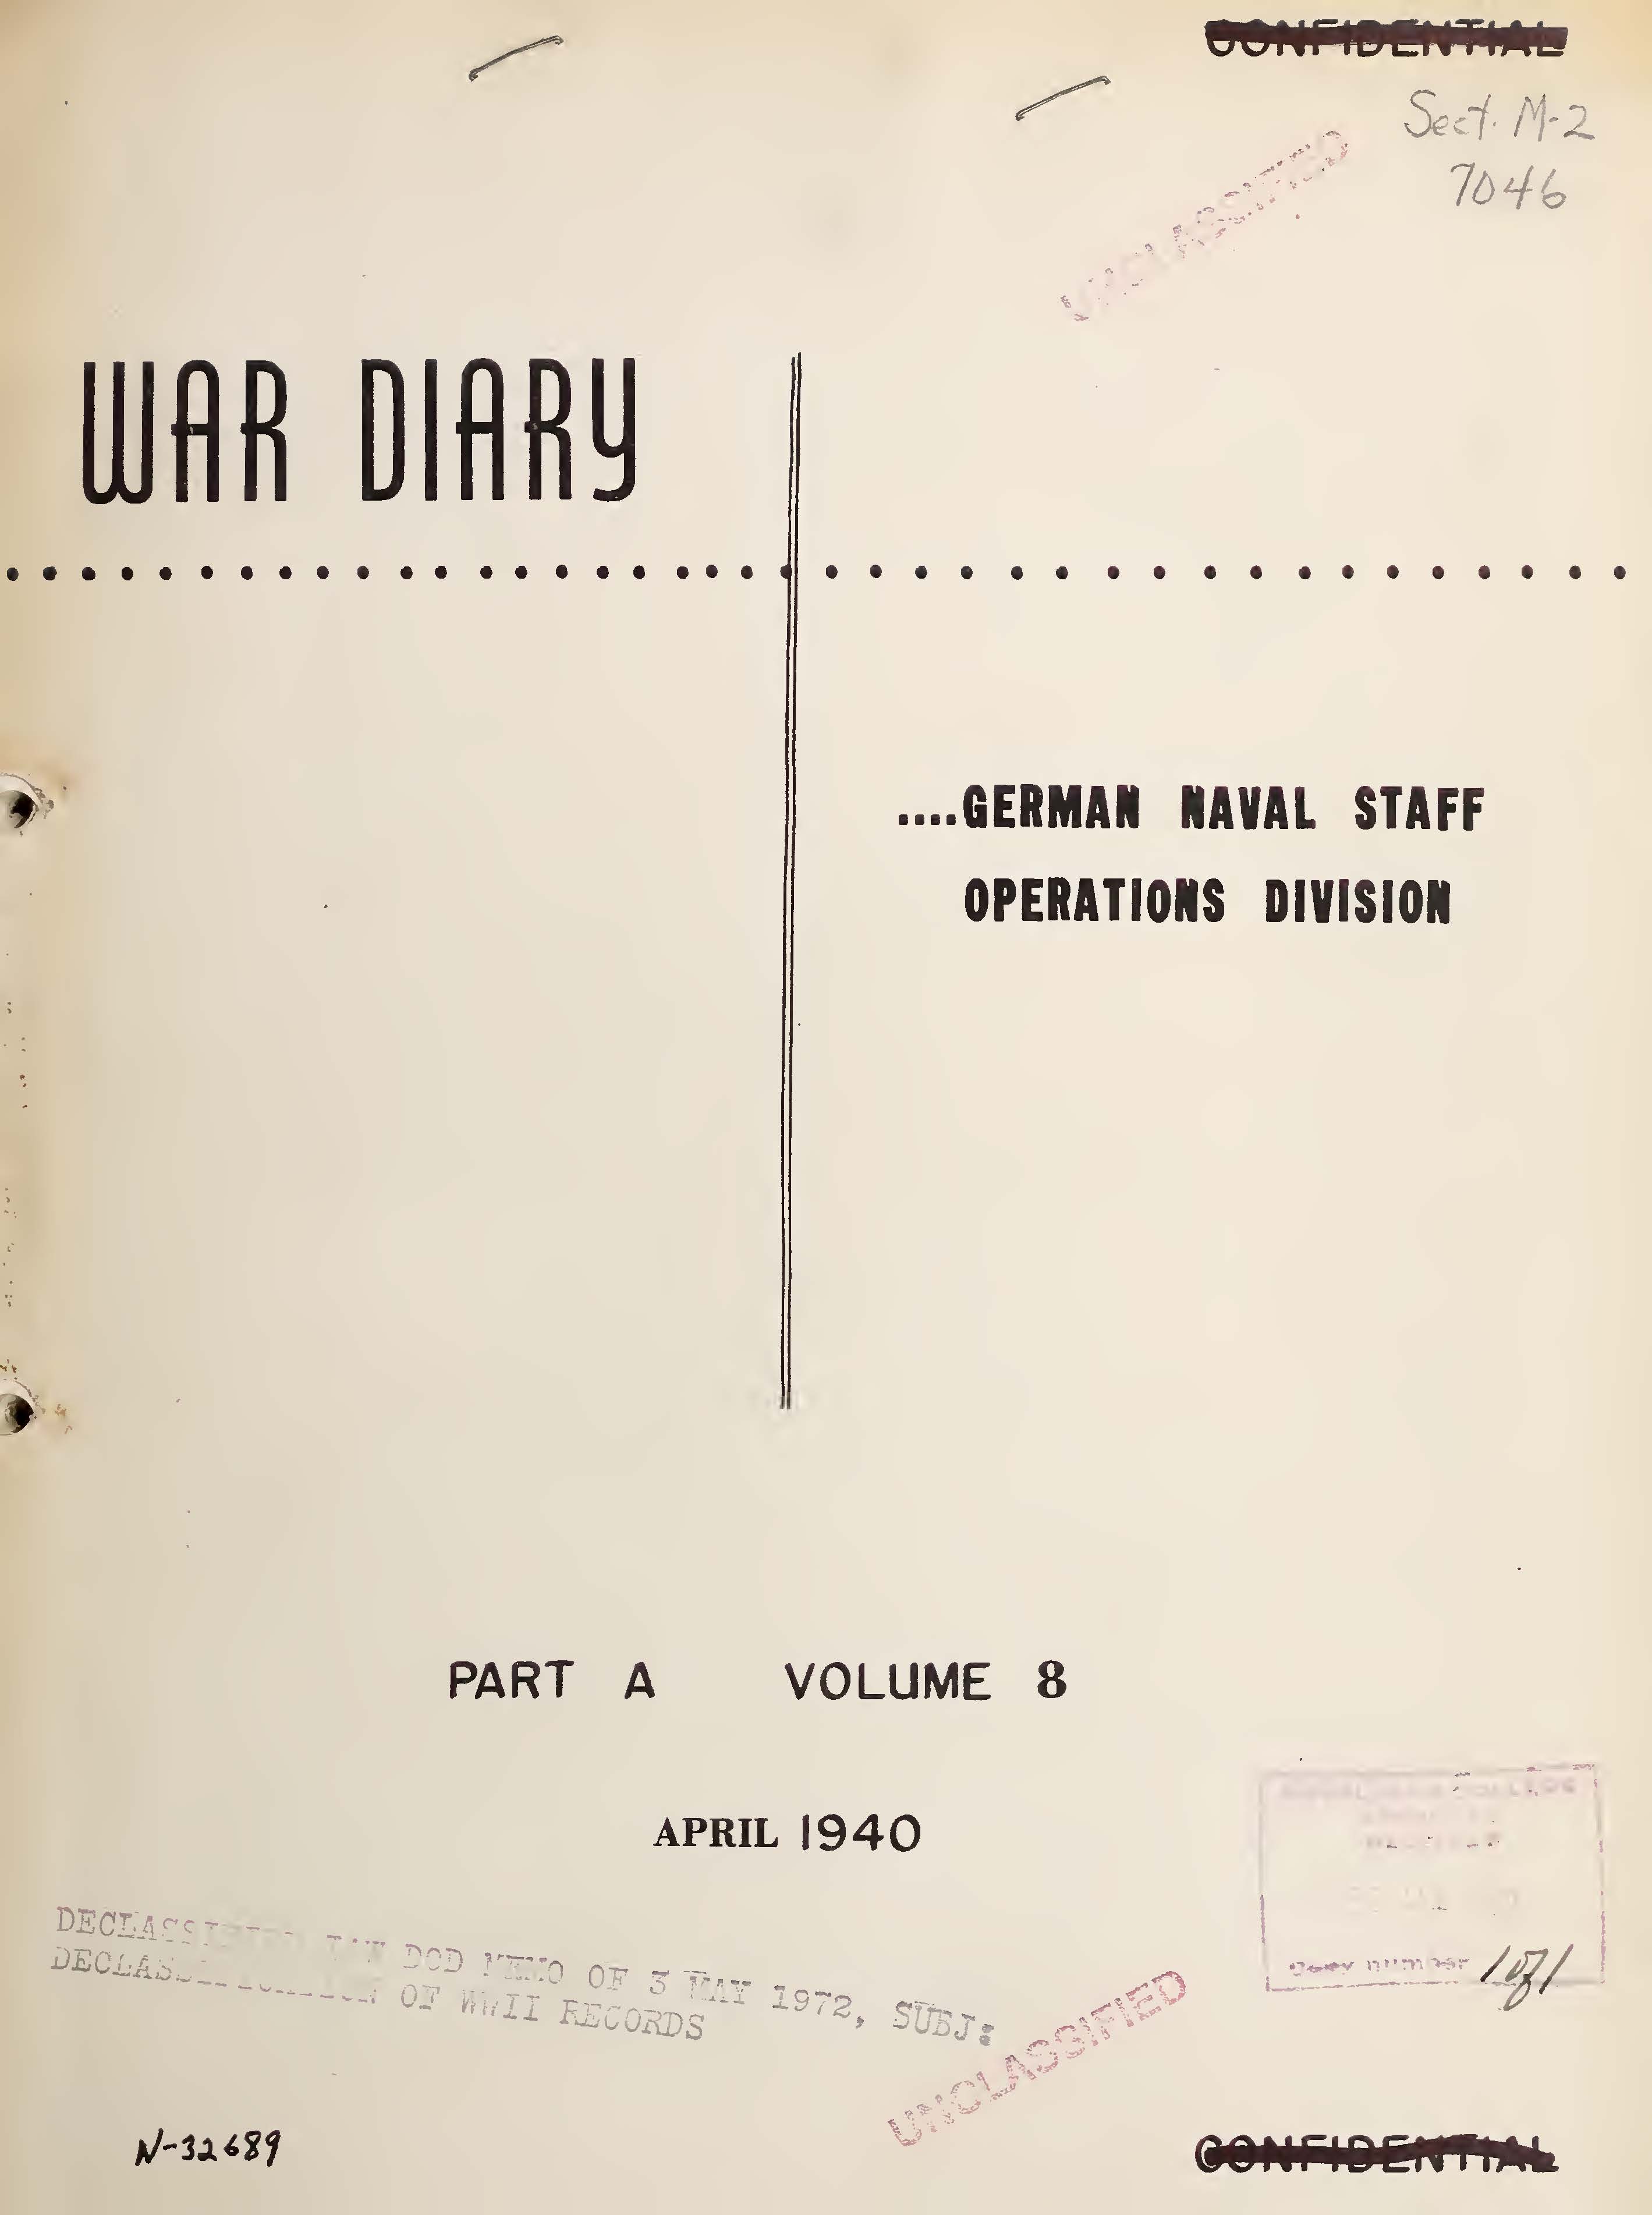 War Diary of German Naval Staff (Operations Division) Part A, Volume 8, April 1940